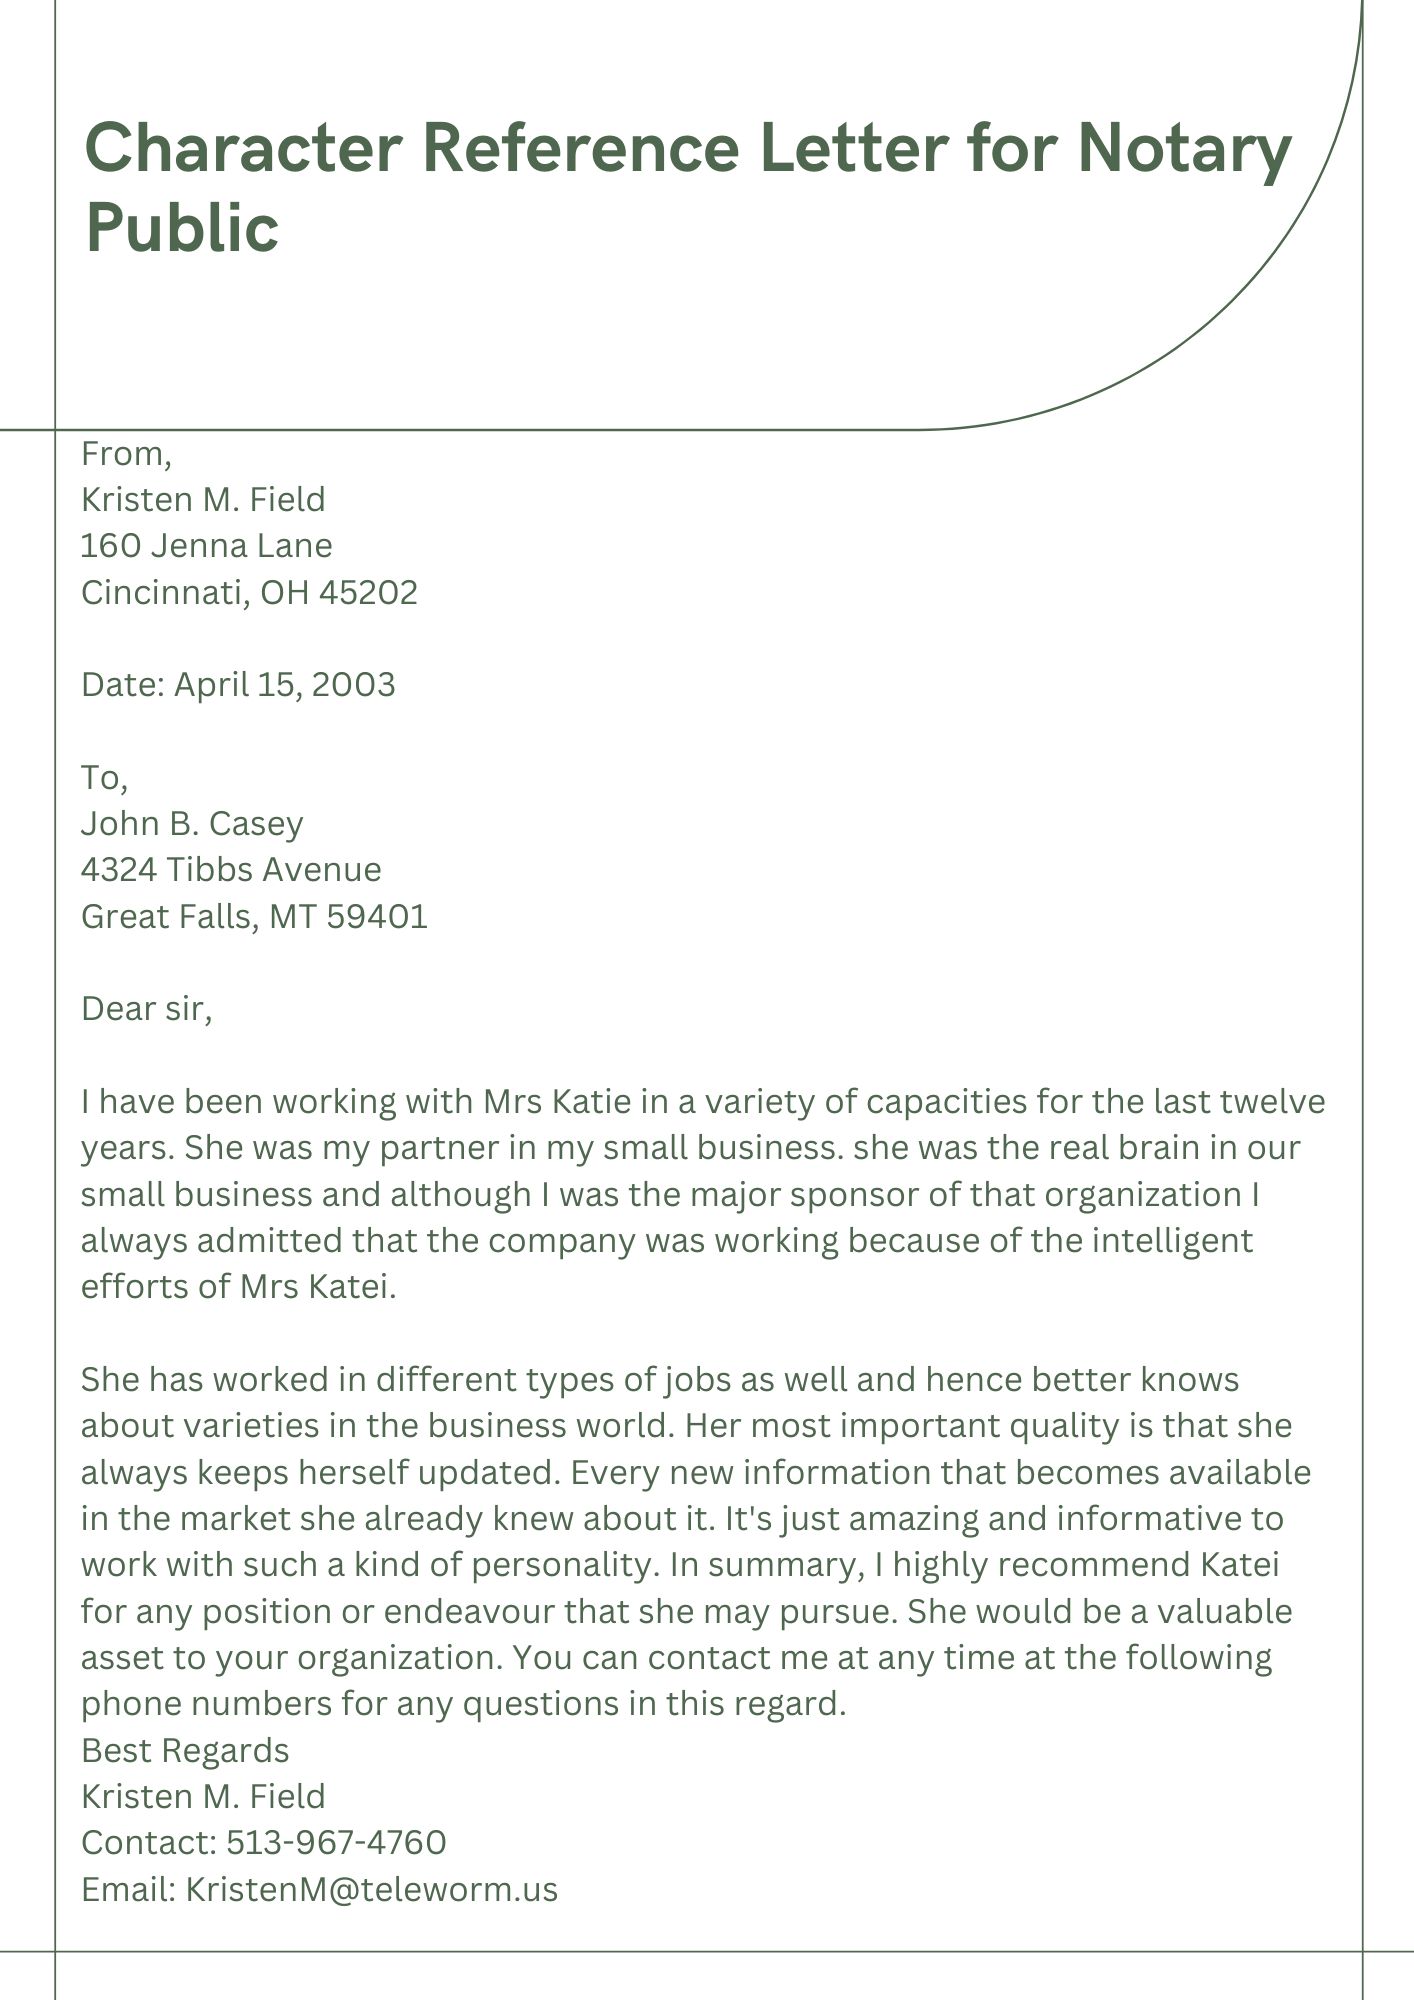 Character Reference Letter for Notary Public